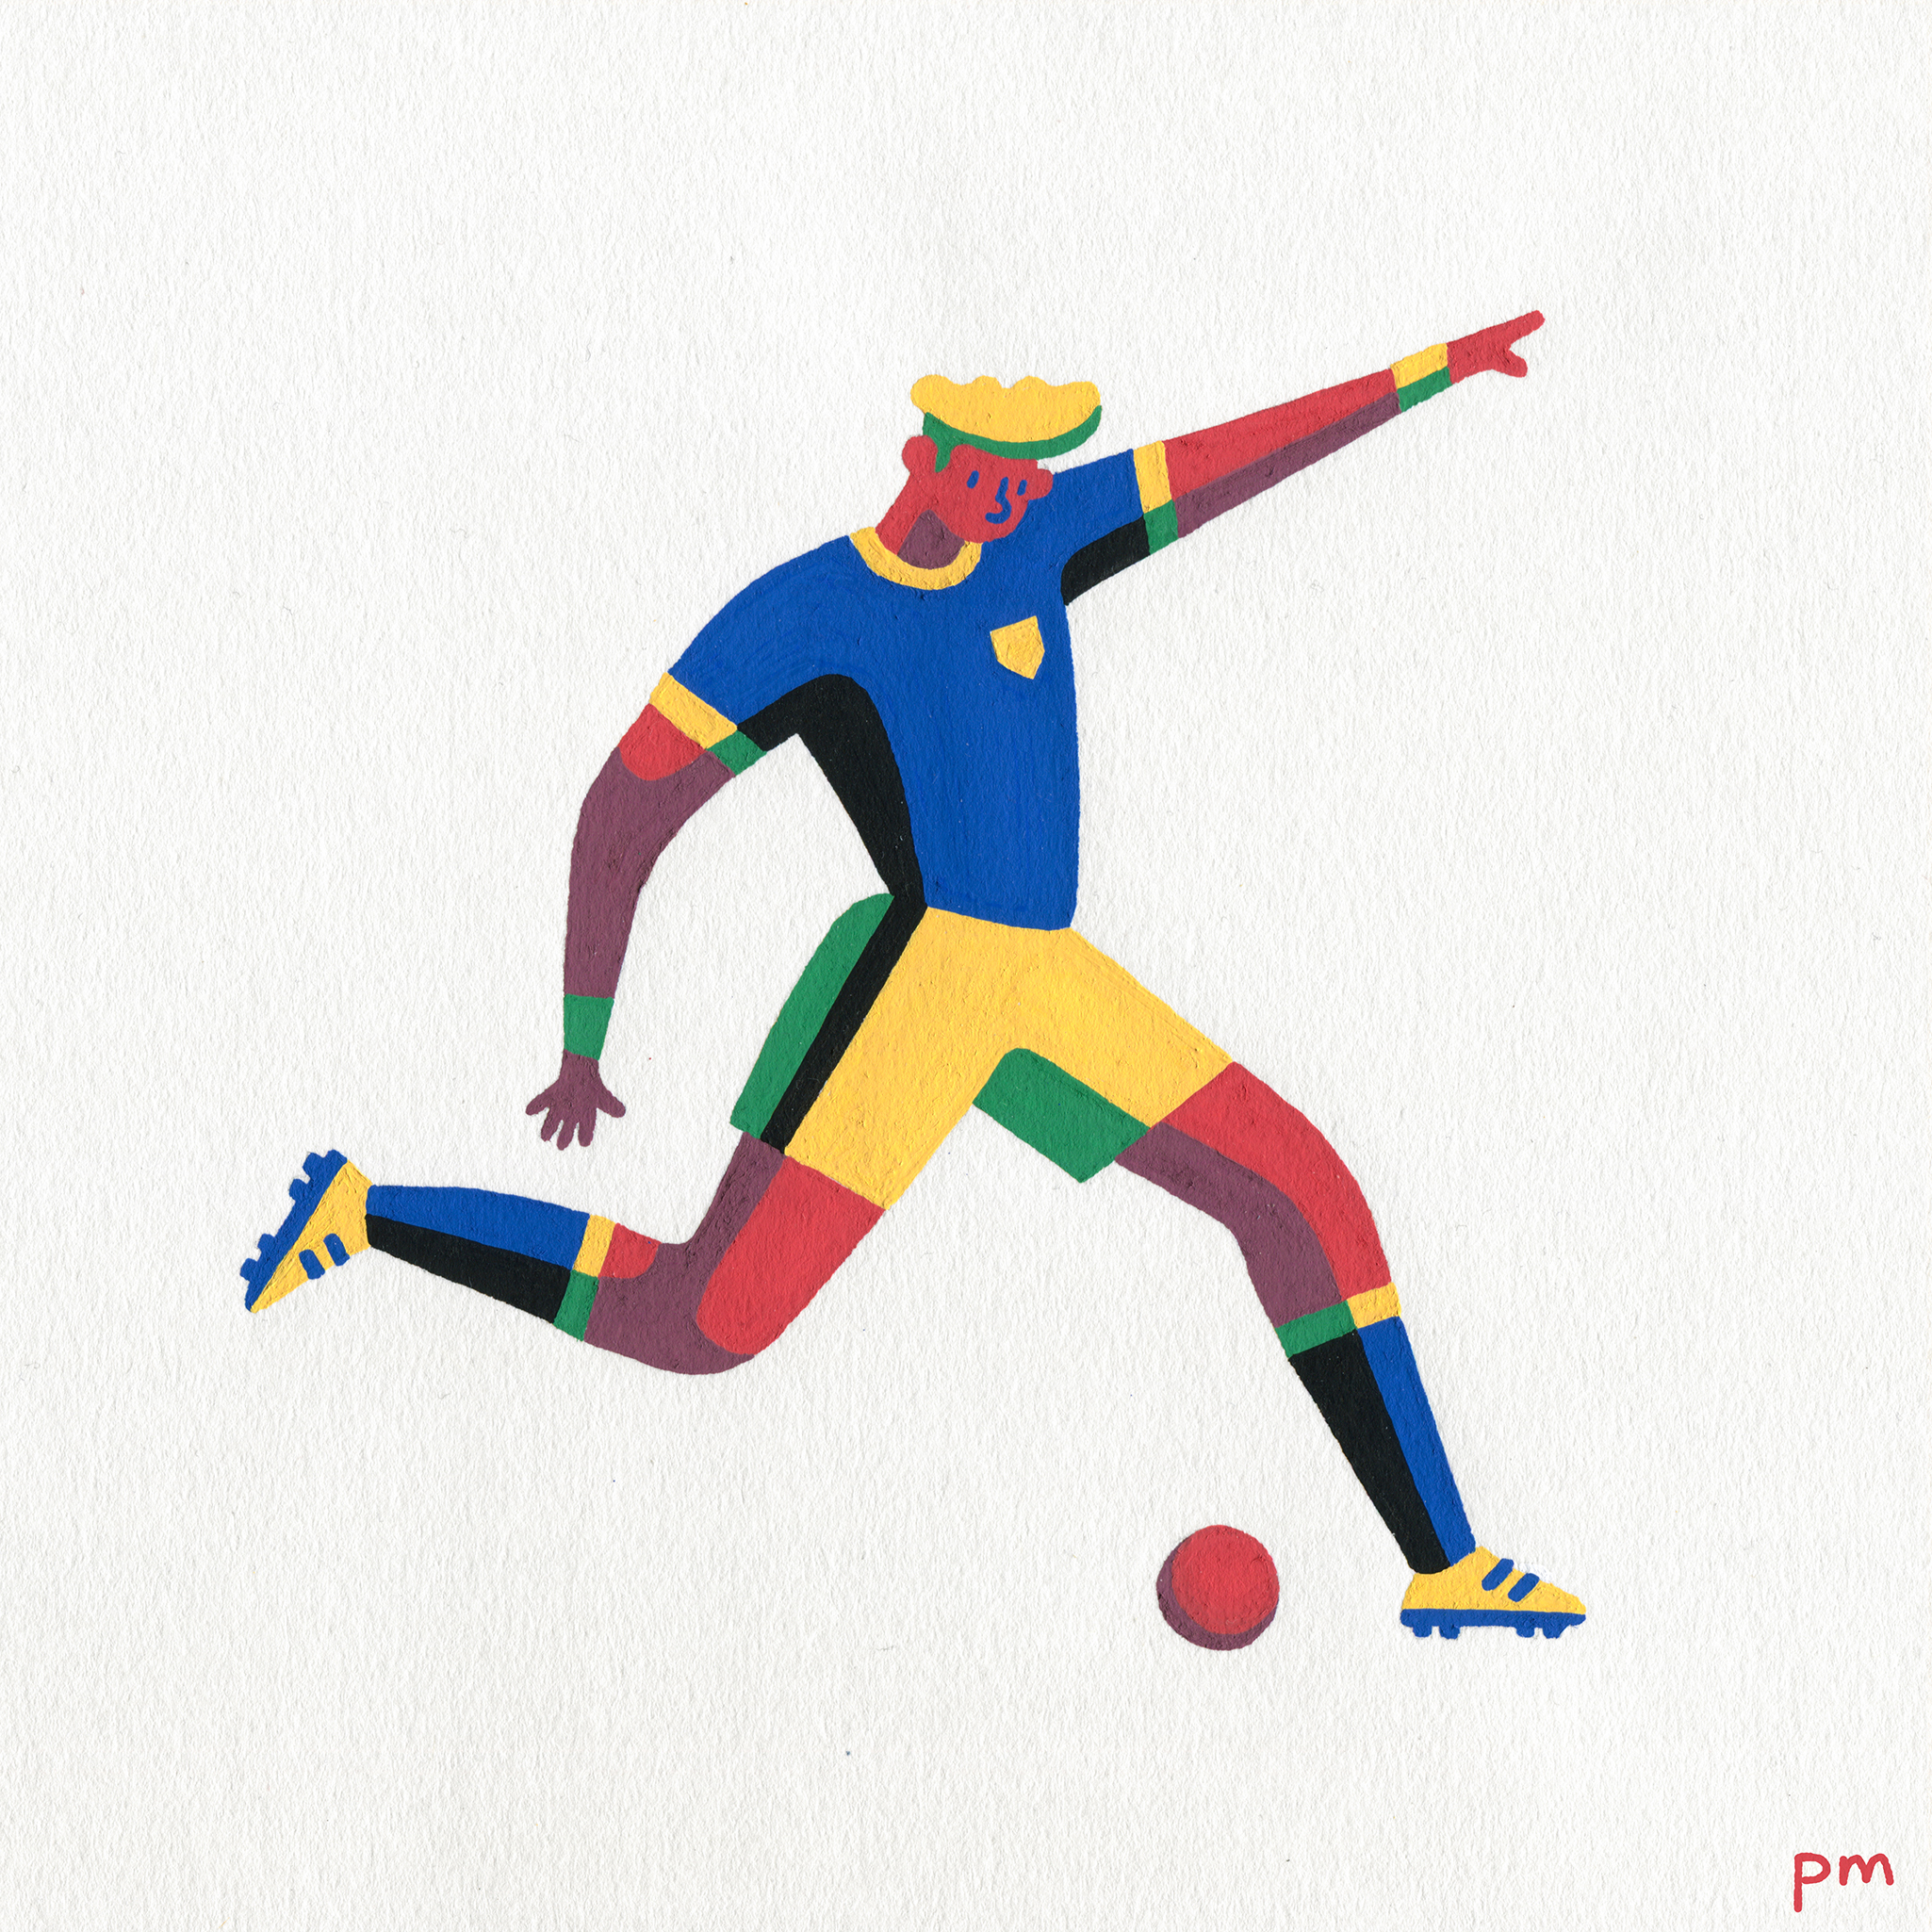 I illustrated this footballer for the football World Cup, painted using colourful posca markers.